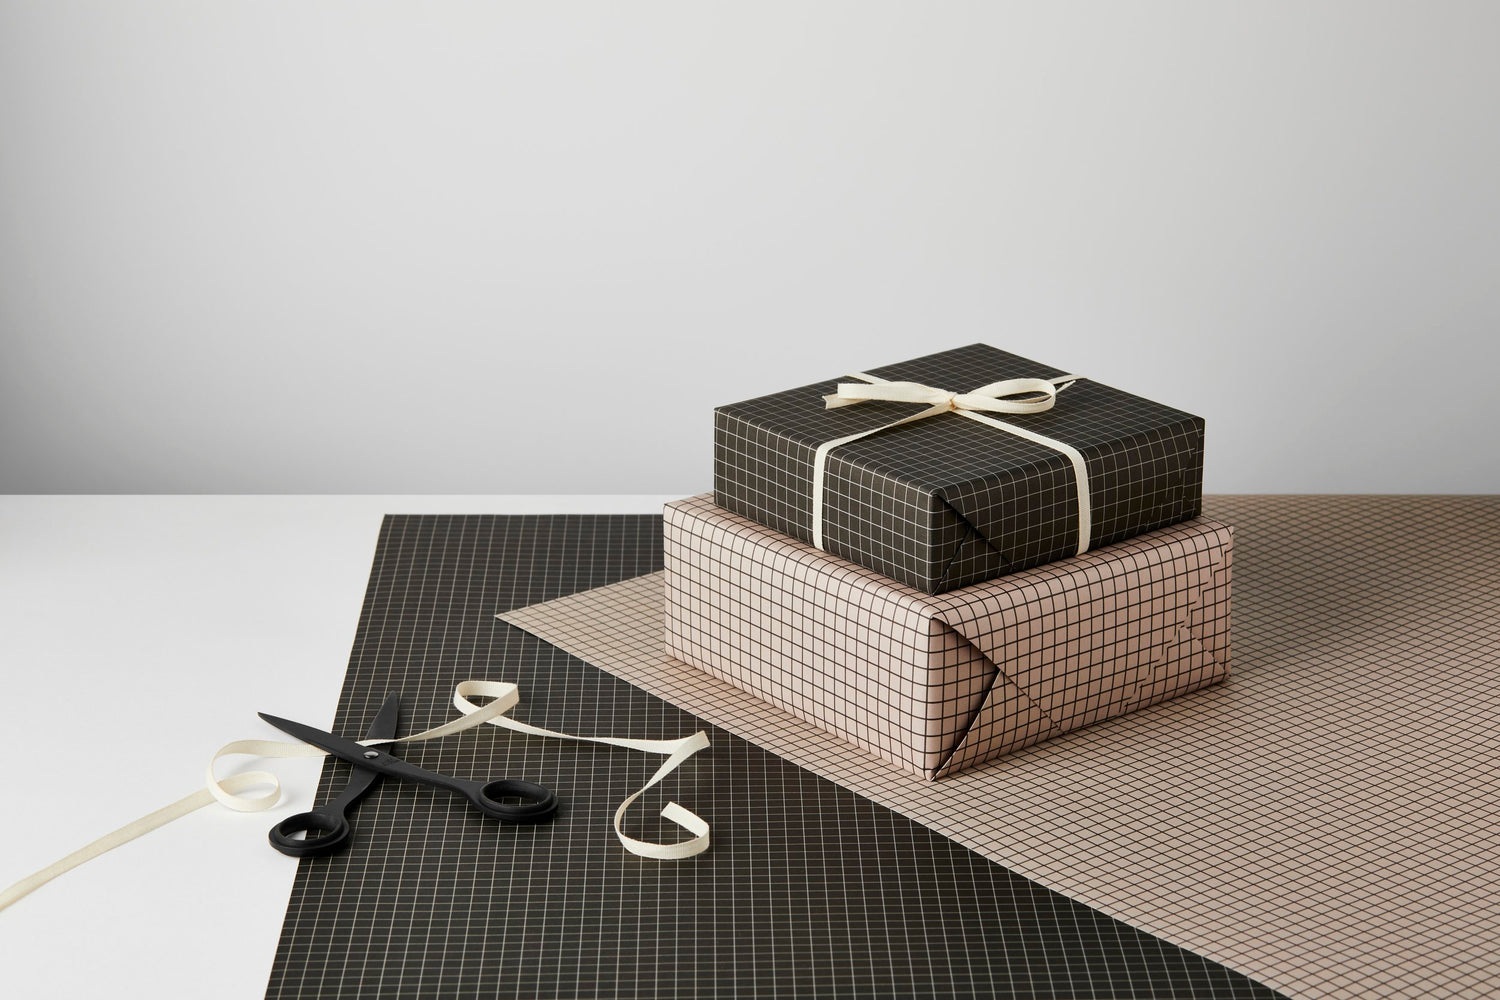 Wrapping paper grid